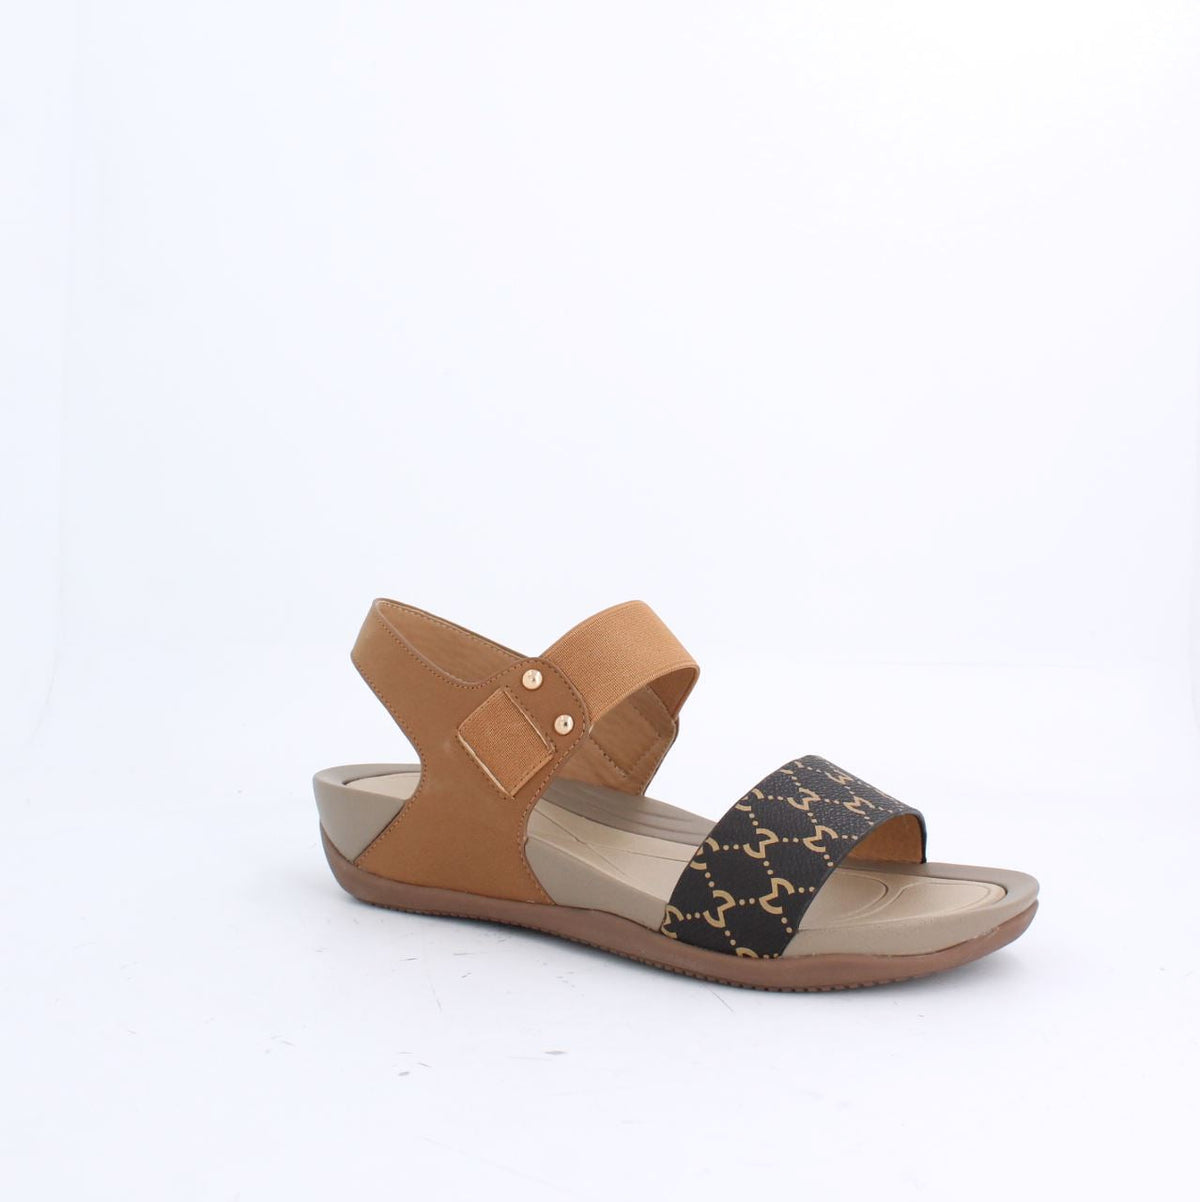 VETROY CASUAL SANDALS - BROWN